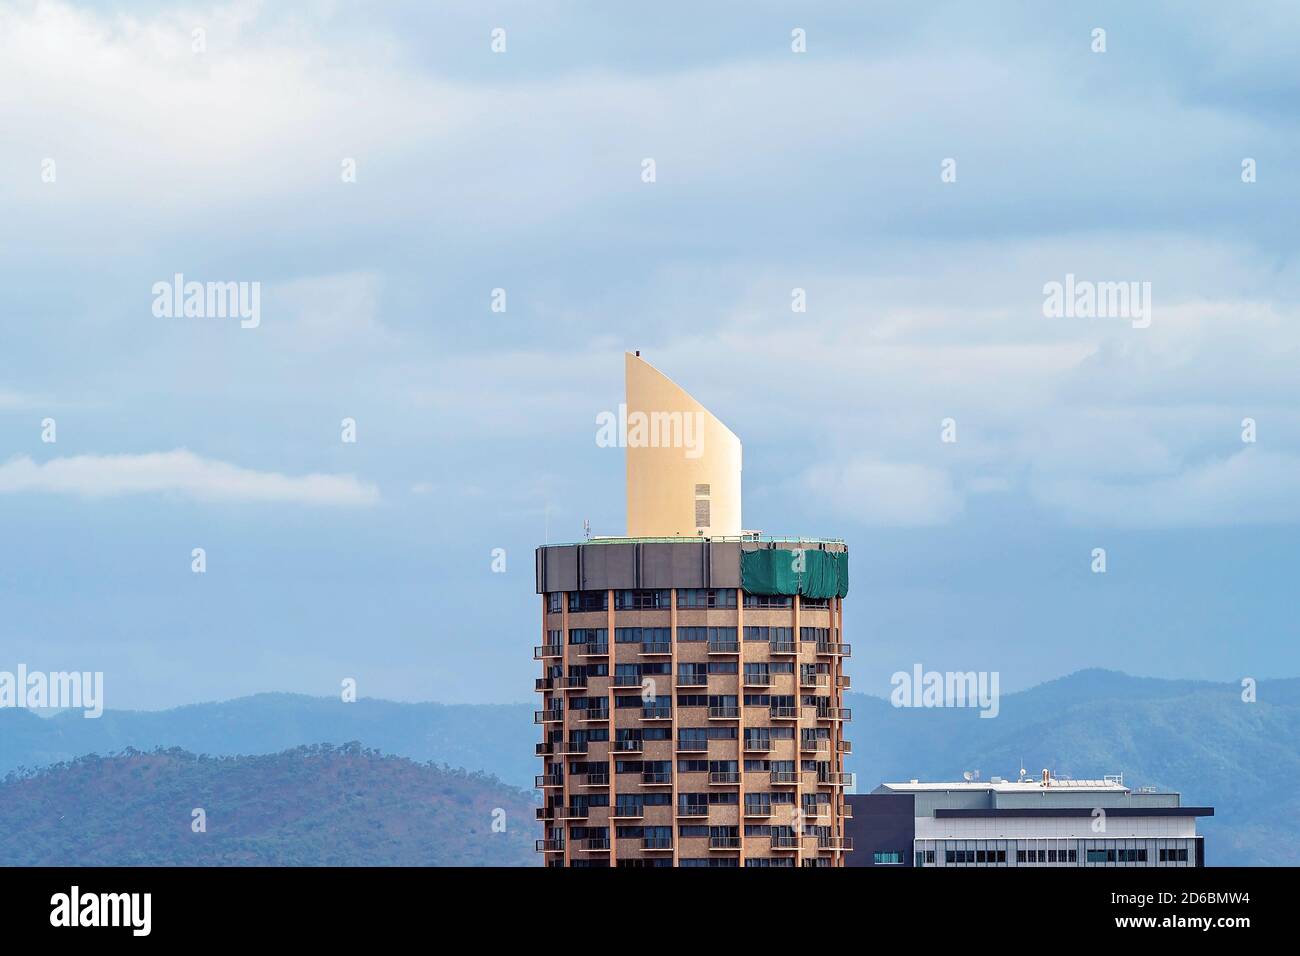 Townsville, Queensland, Australia - June 2020: High rise hotel in the city shaped like a sugar shaker Stock Photo